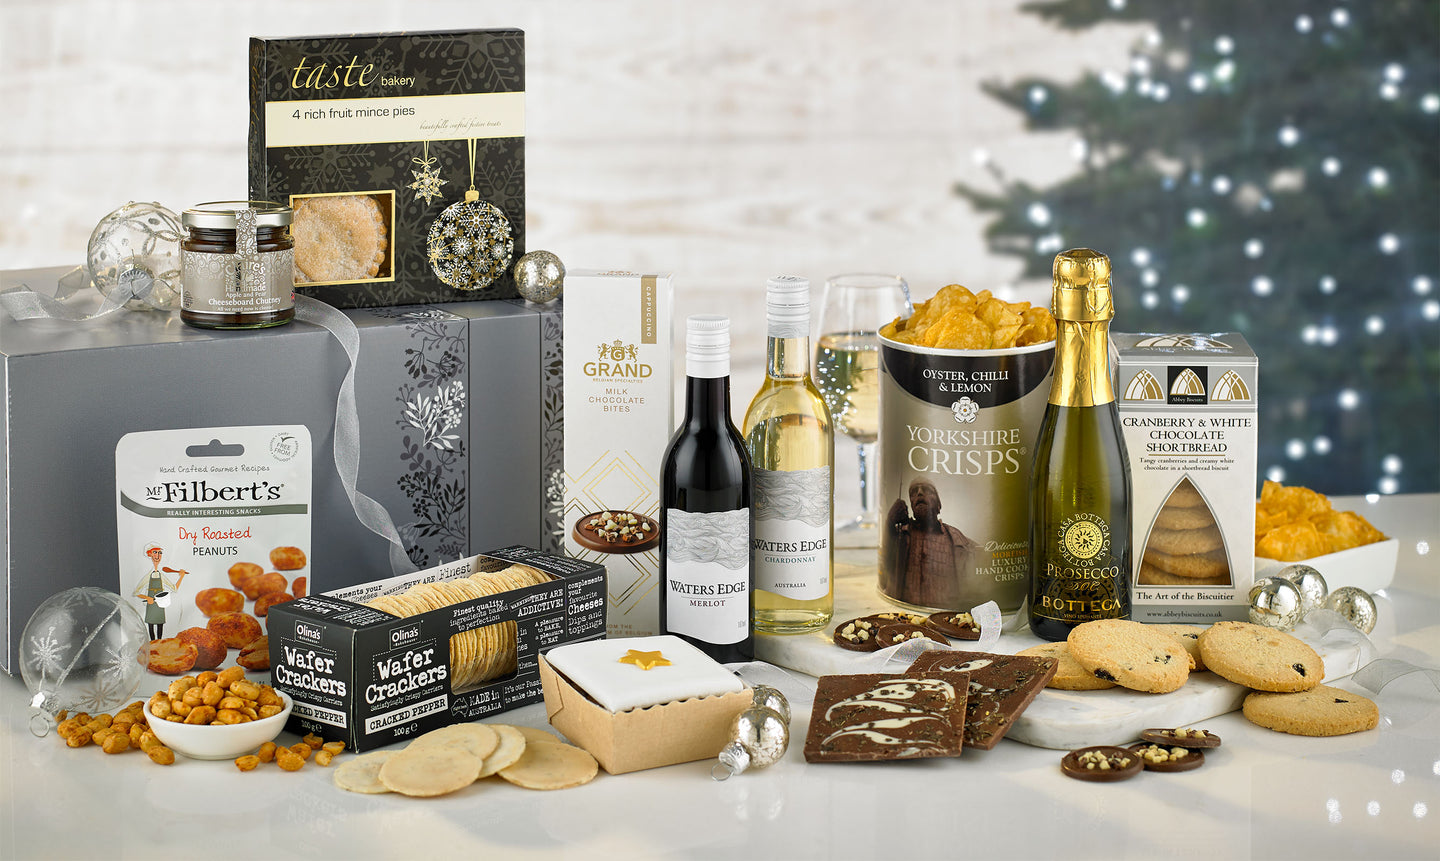 A Wine & Prosecco gift box from Spicers of Hythe, a perfect luxury gift box for corporate customers & staff. Featuring wines, chocolates, cakes & more.